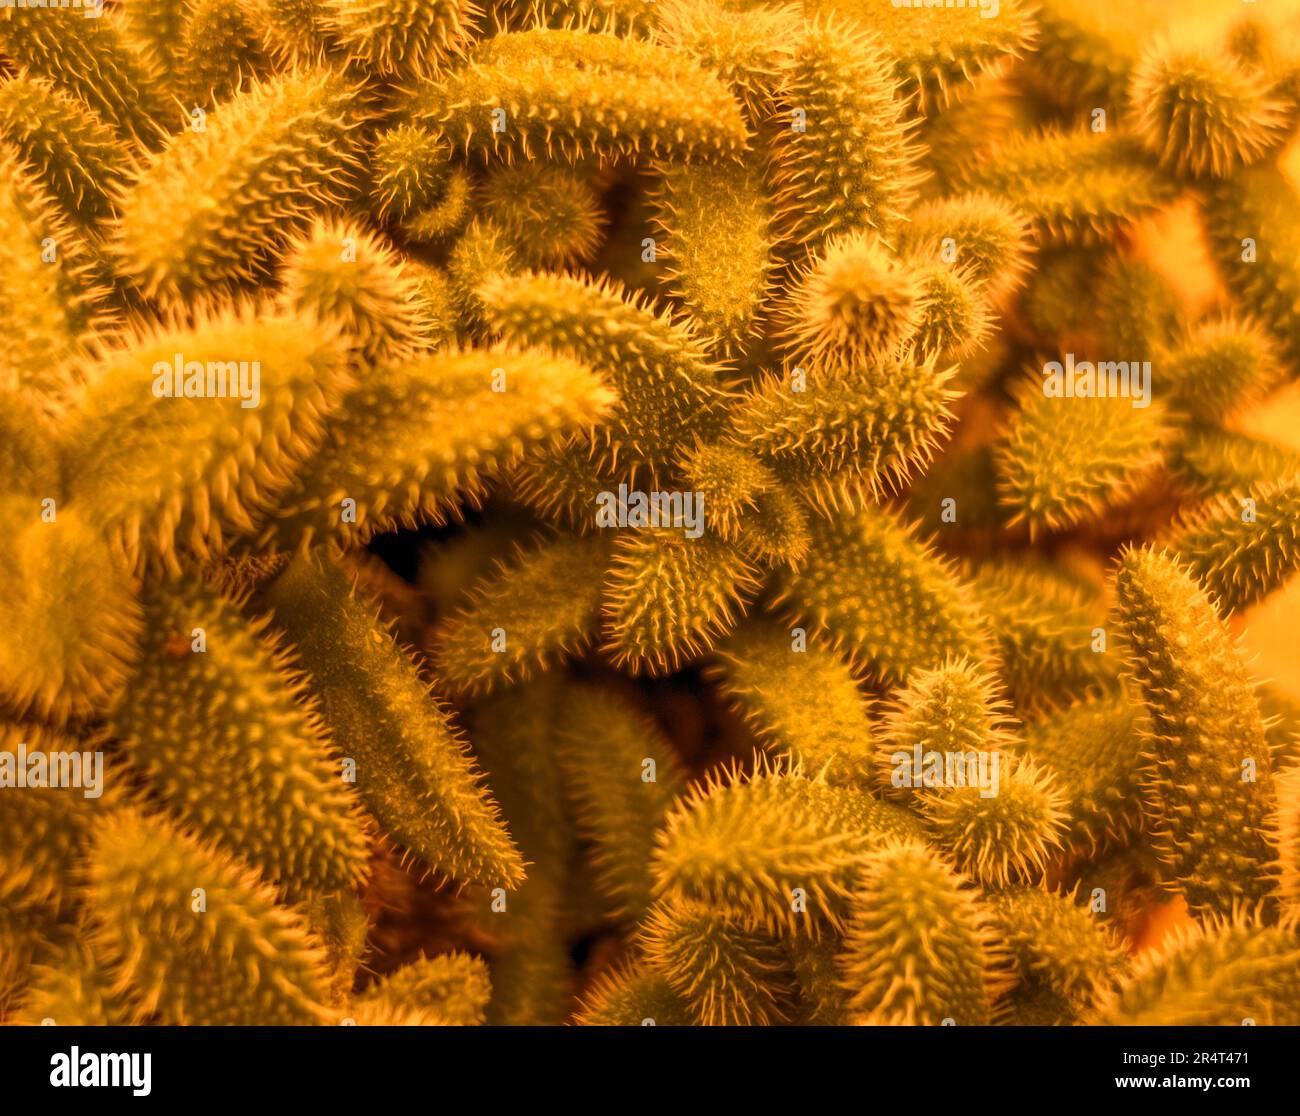 Closeup shot showing lots of orange toned pickle plant leaves Stock Photo